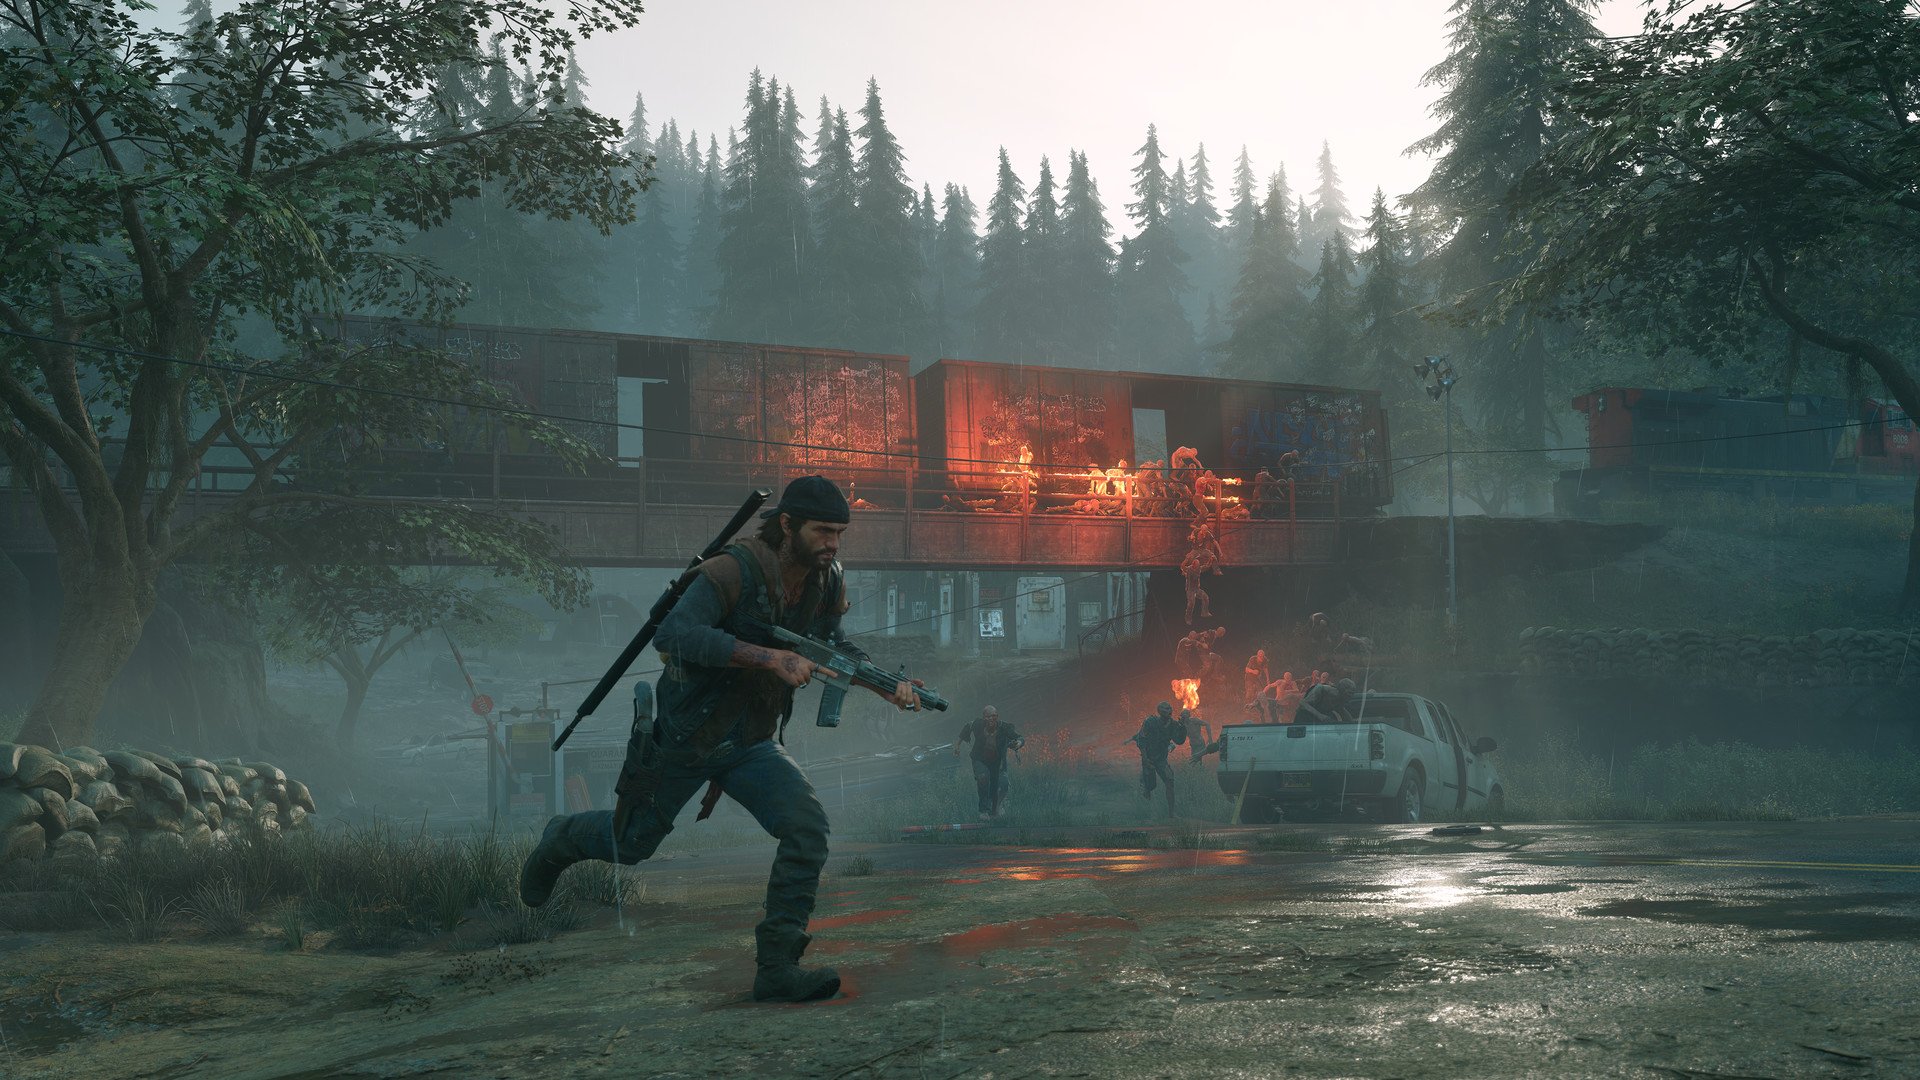 Director confirms Days Gone 2 was pitched, but won't verify Sony